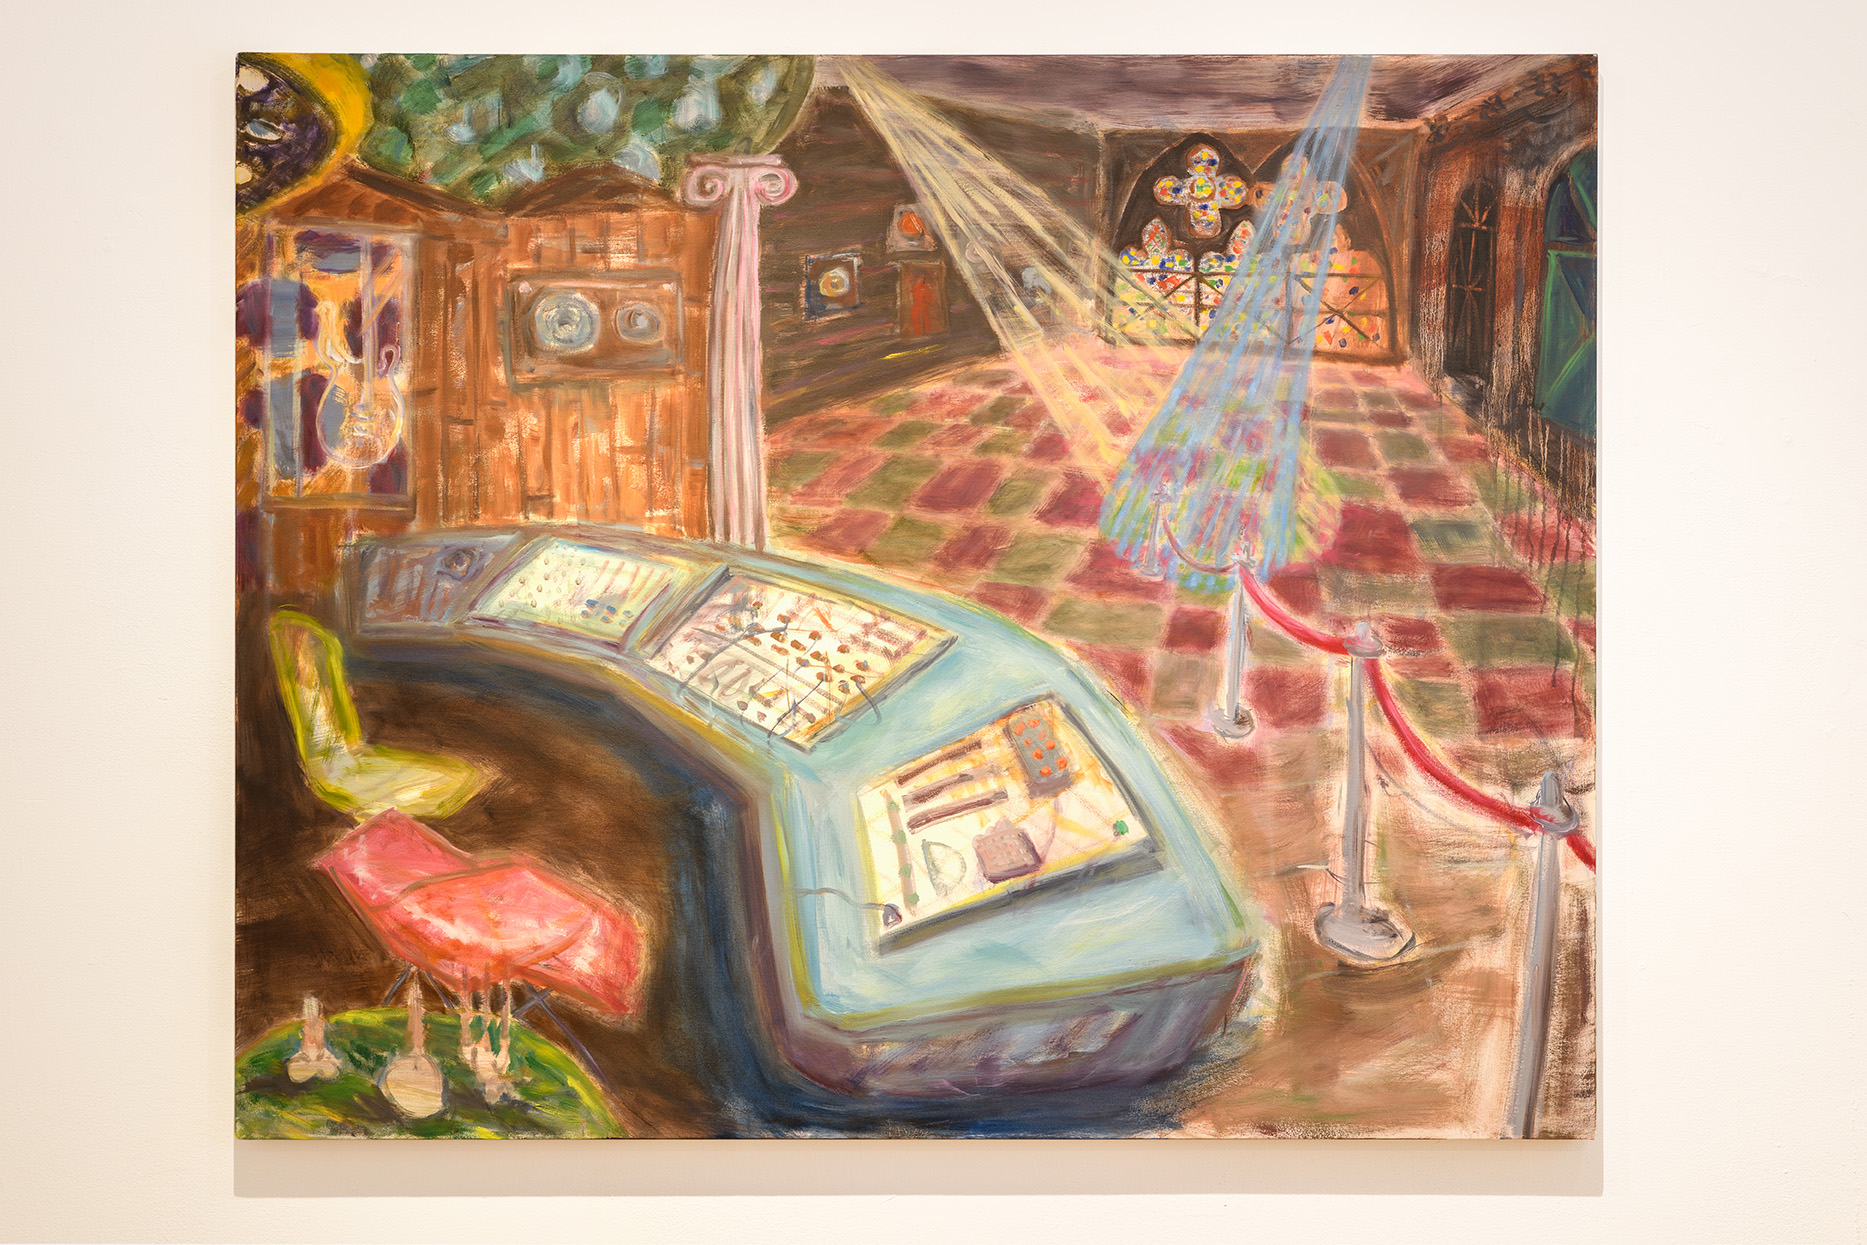 [A colorful painting of an extravagant interior at Paisley Park. The room— from background to foreground— contains a stained glass window, a checkered floor, spotlights, an ionic column, a wall with Prince’s Cloud Guitar and platinum record, a control panel with chairs, and a three-pole rope stanchion.]